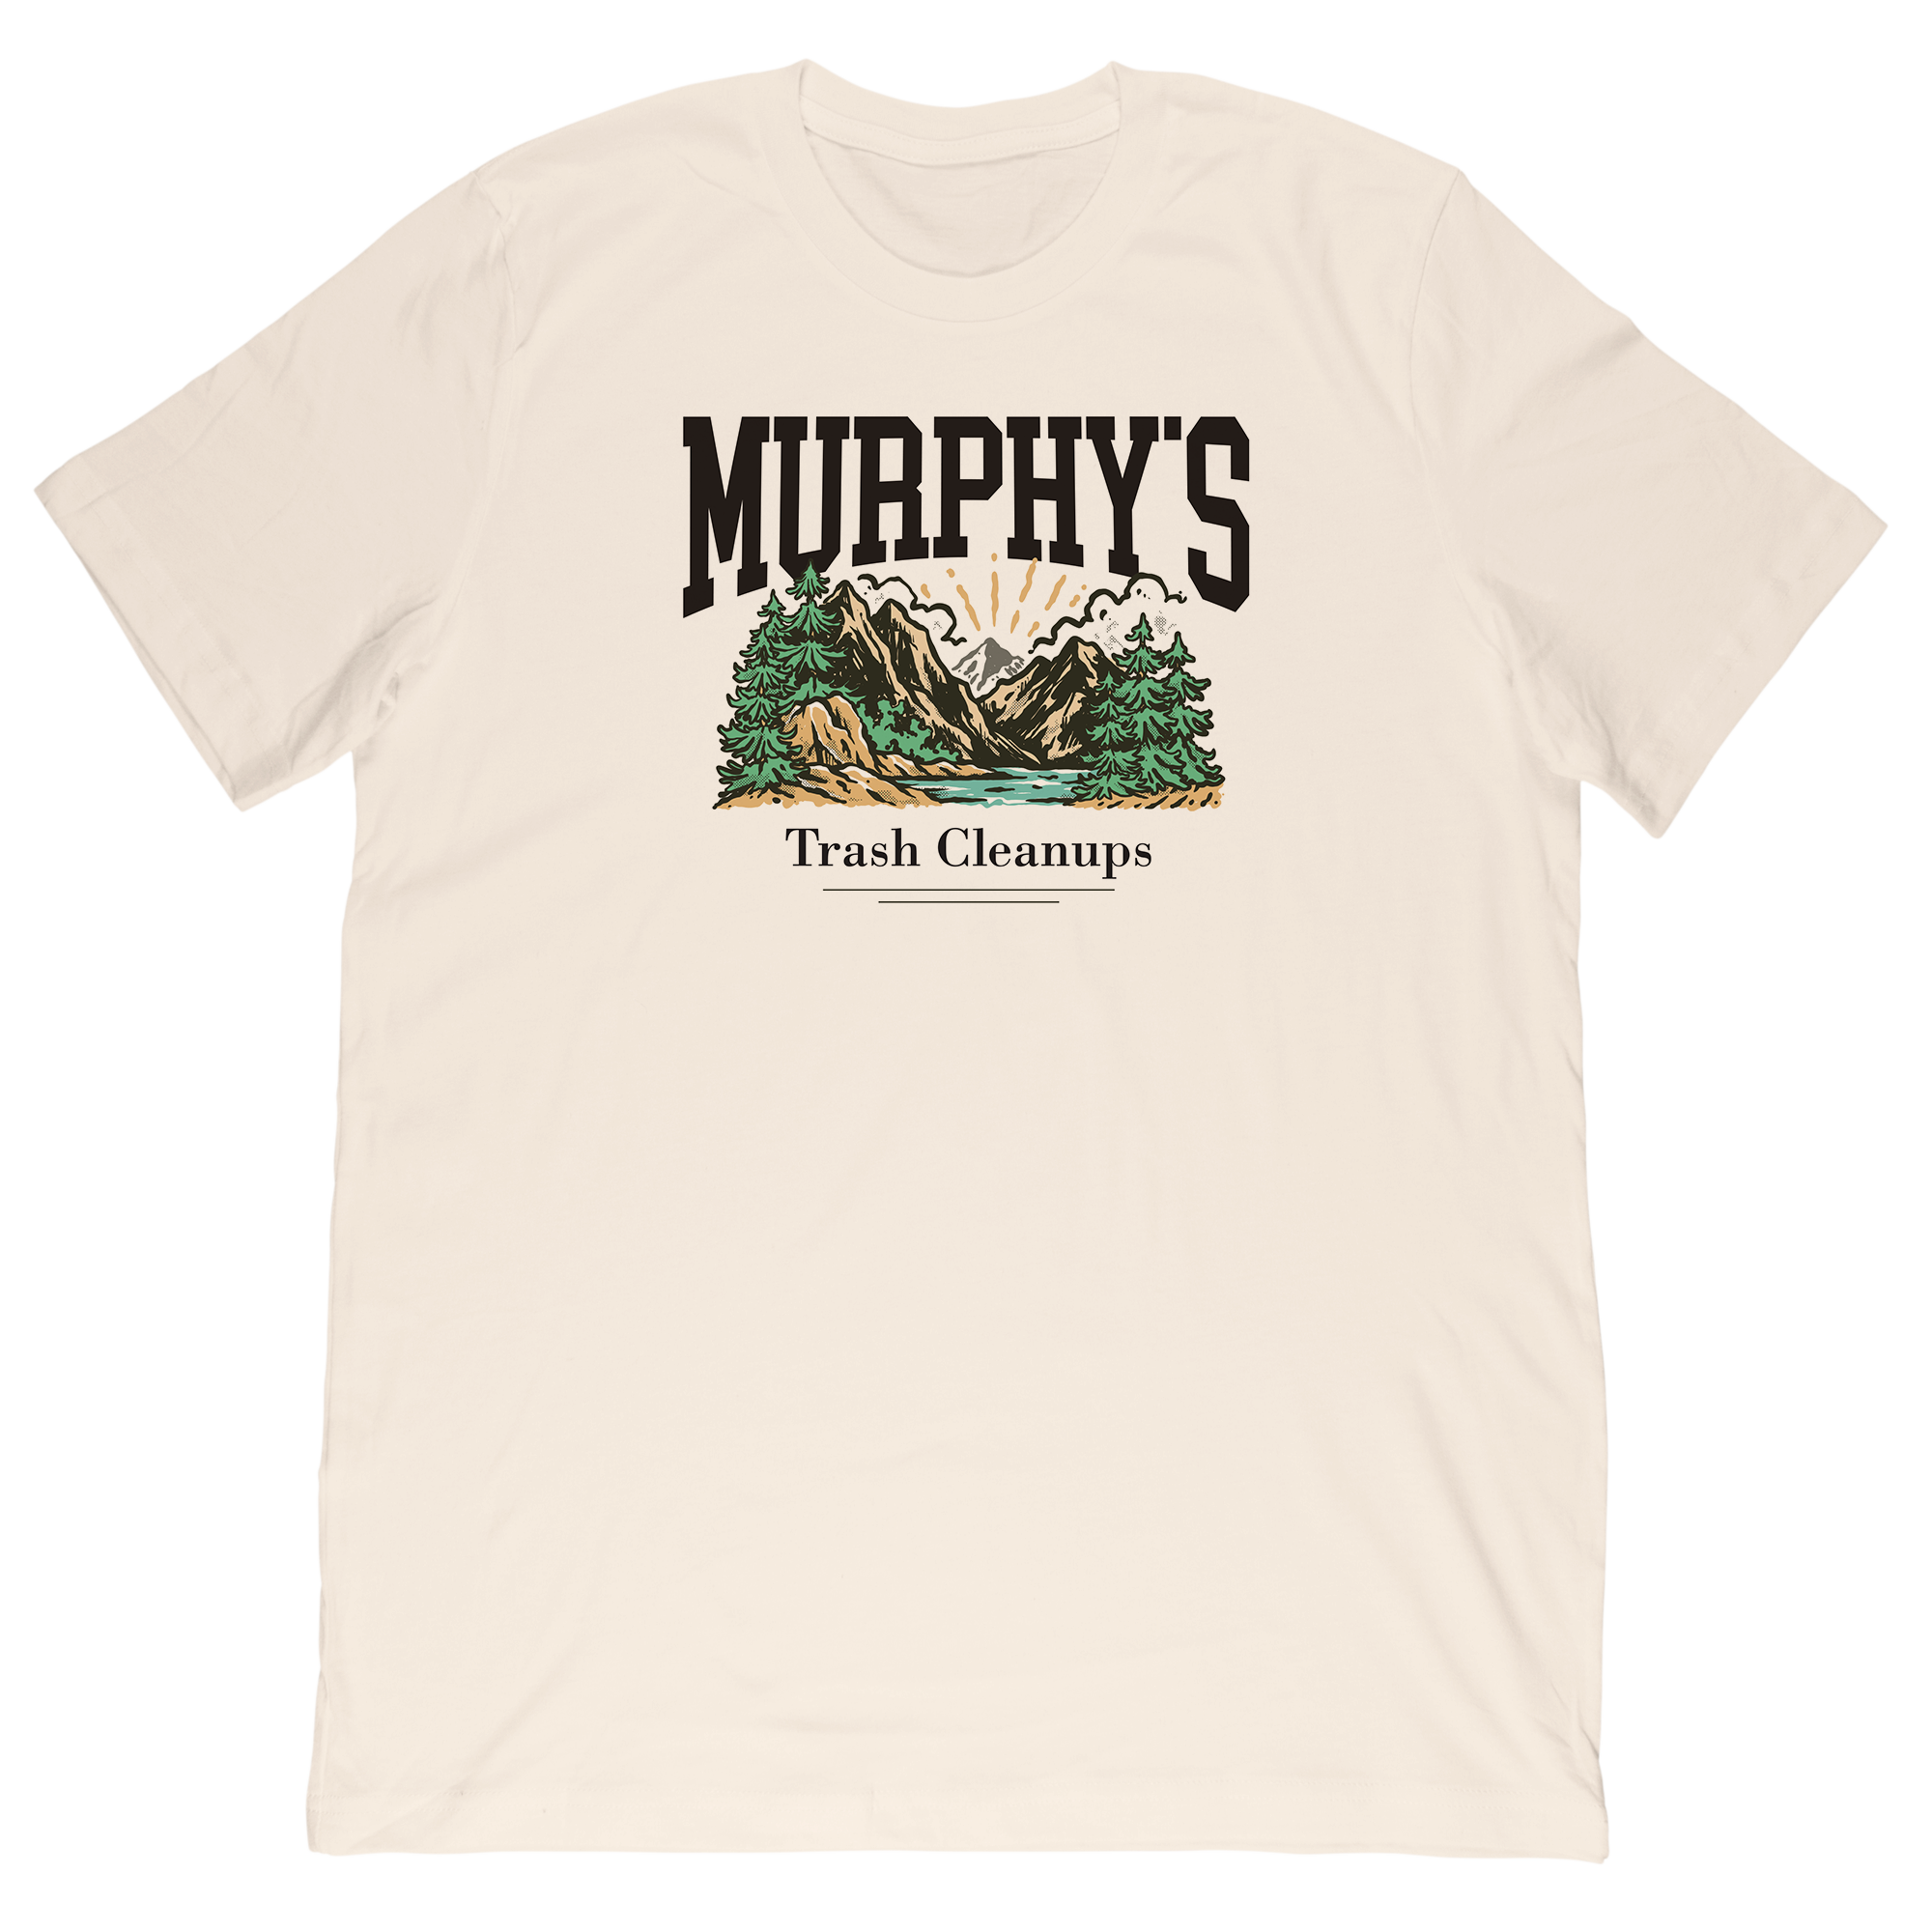 Murphy's Trash Cleanups Midweight Tee